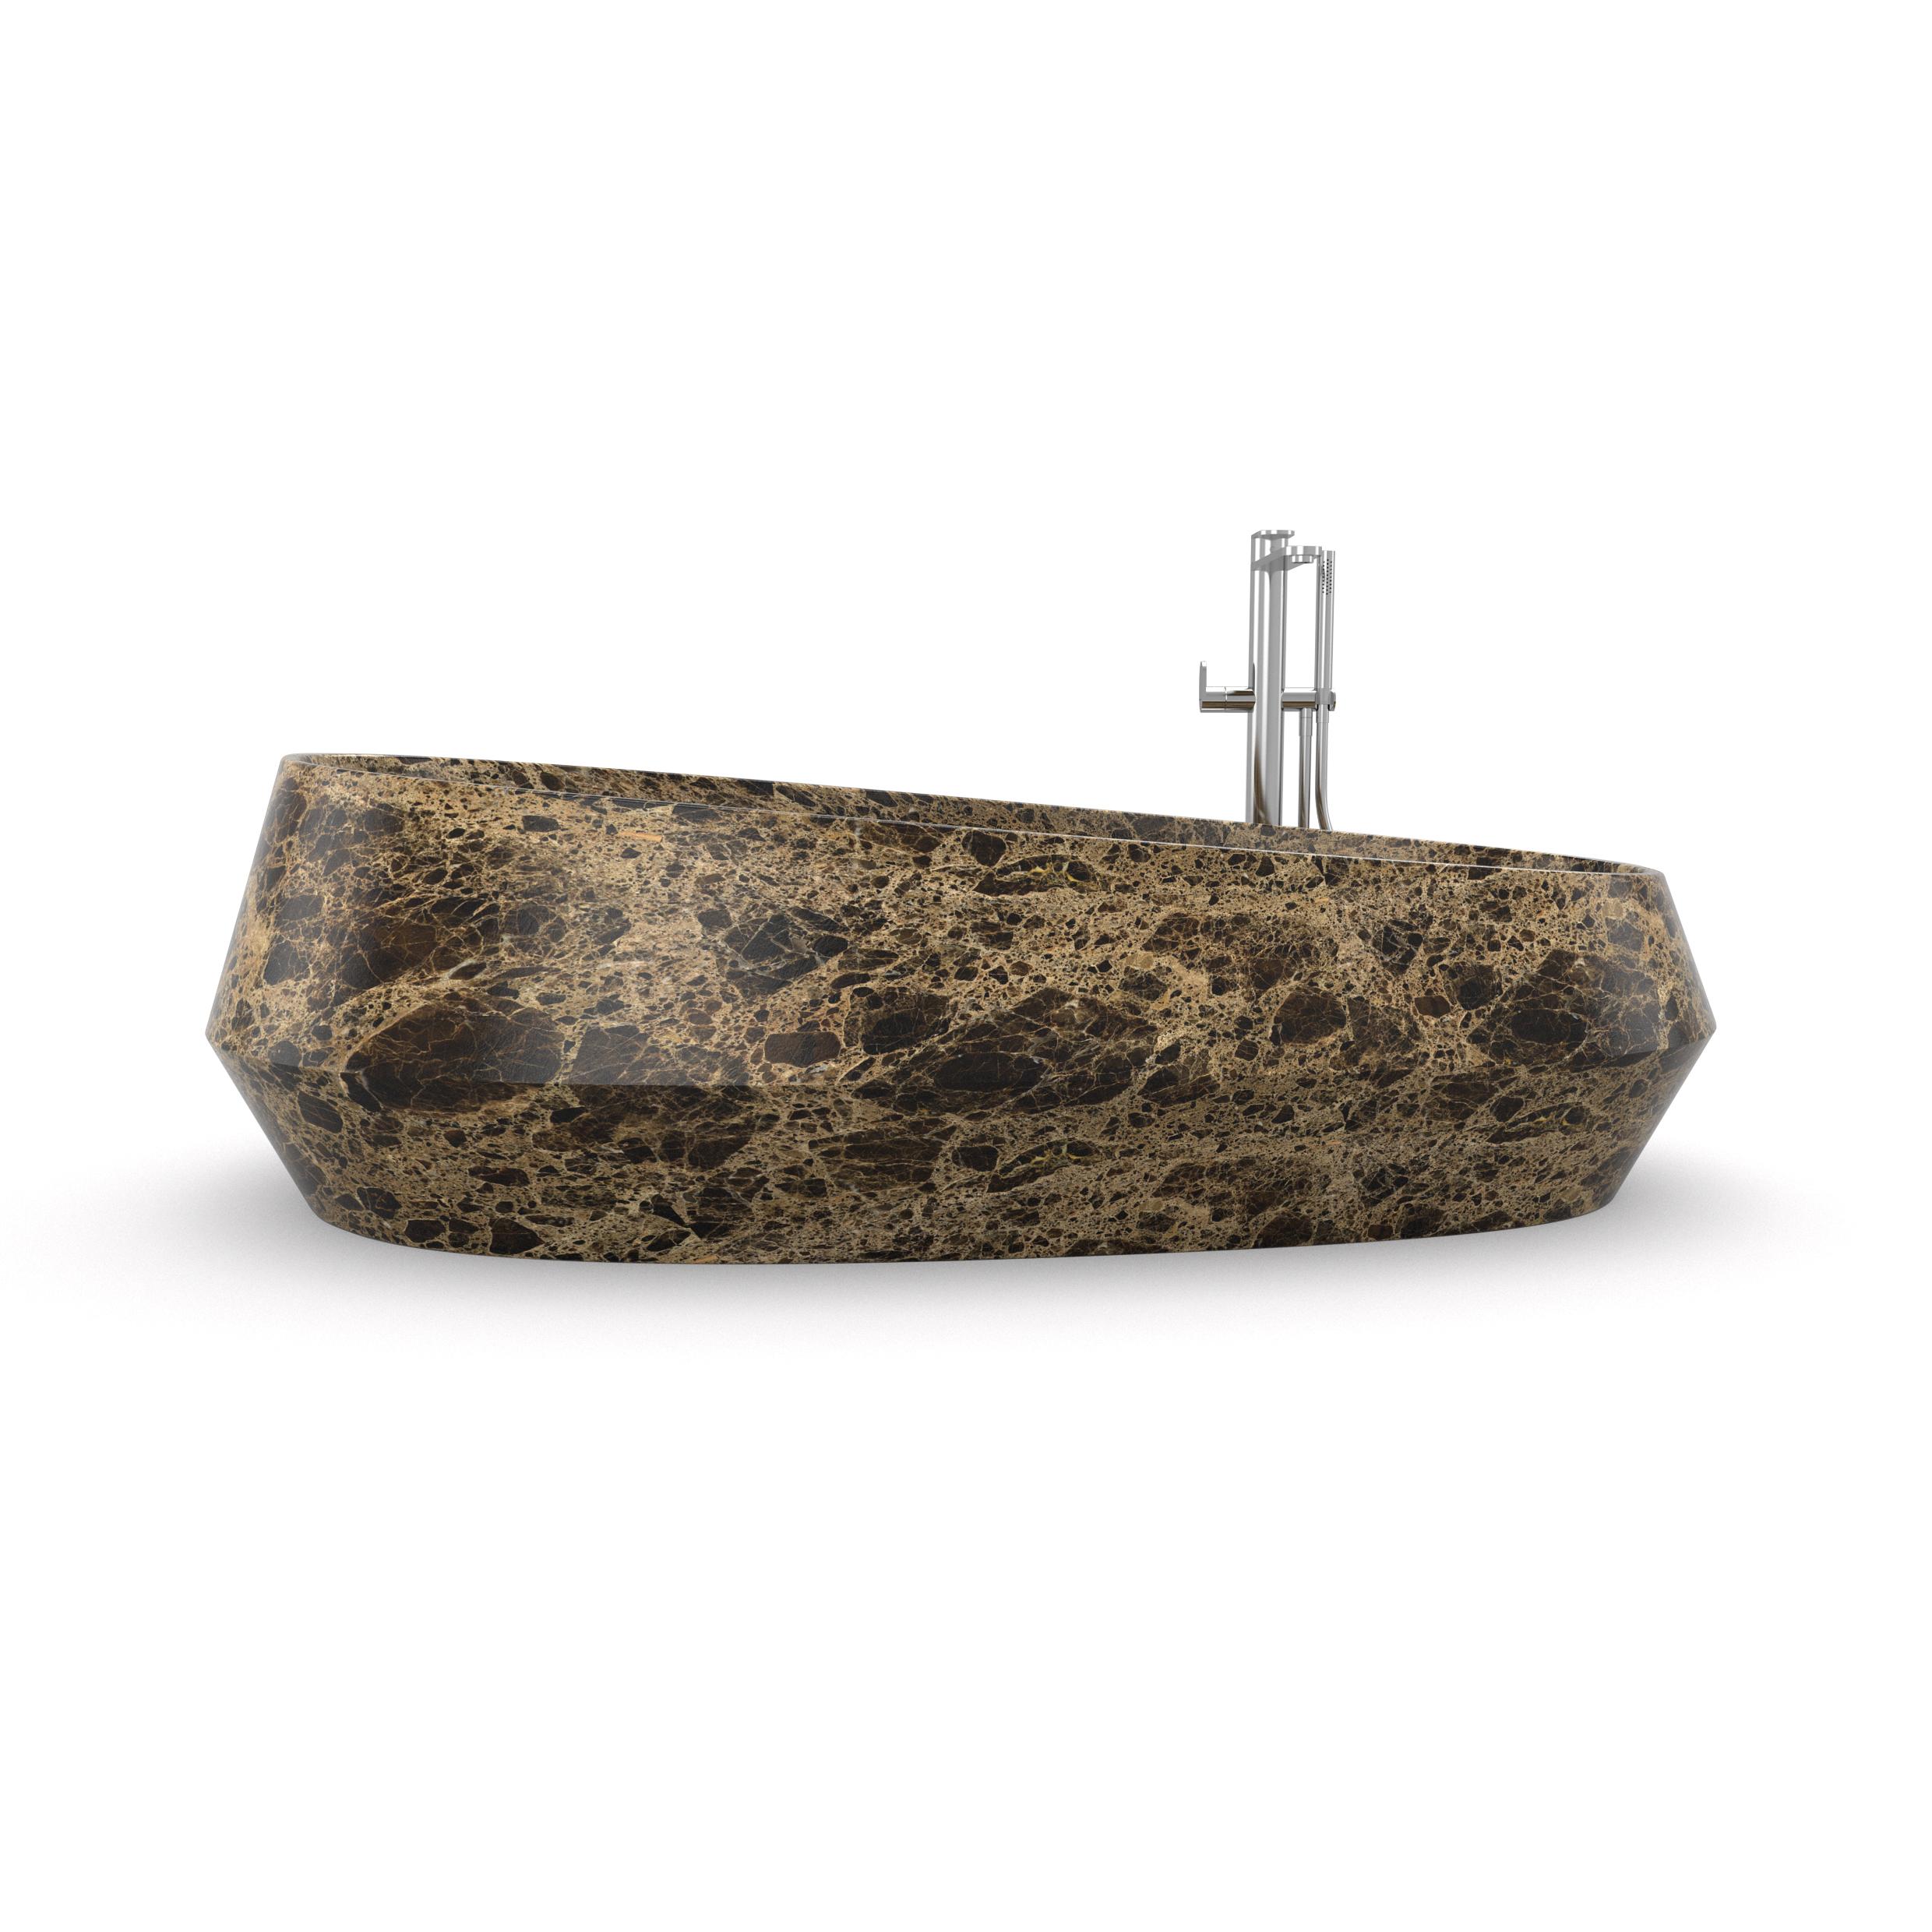 Opera Tosca bath by Marmi Serafini
Materials: Emperador Brown marble.
Dimensions: D 92 x W 170 x H 50 cm
Available in other marbles. Also available in shaped version.
Tap not included.

The large dimensions and the elegant silhouette certainly does